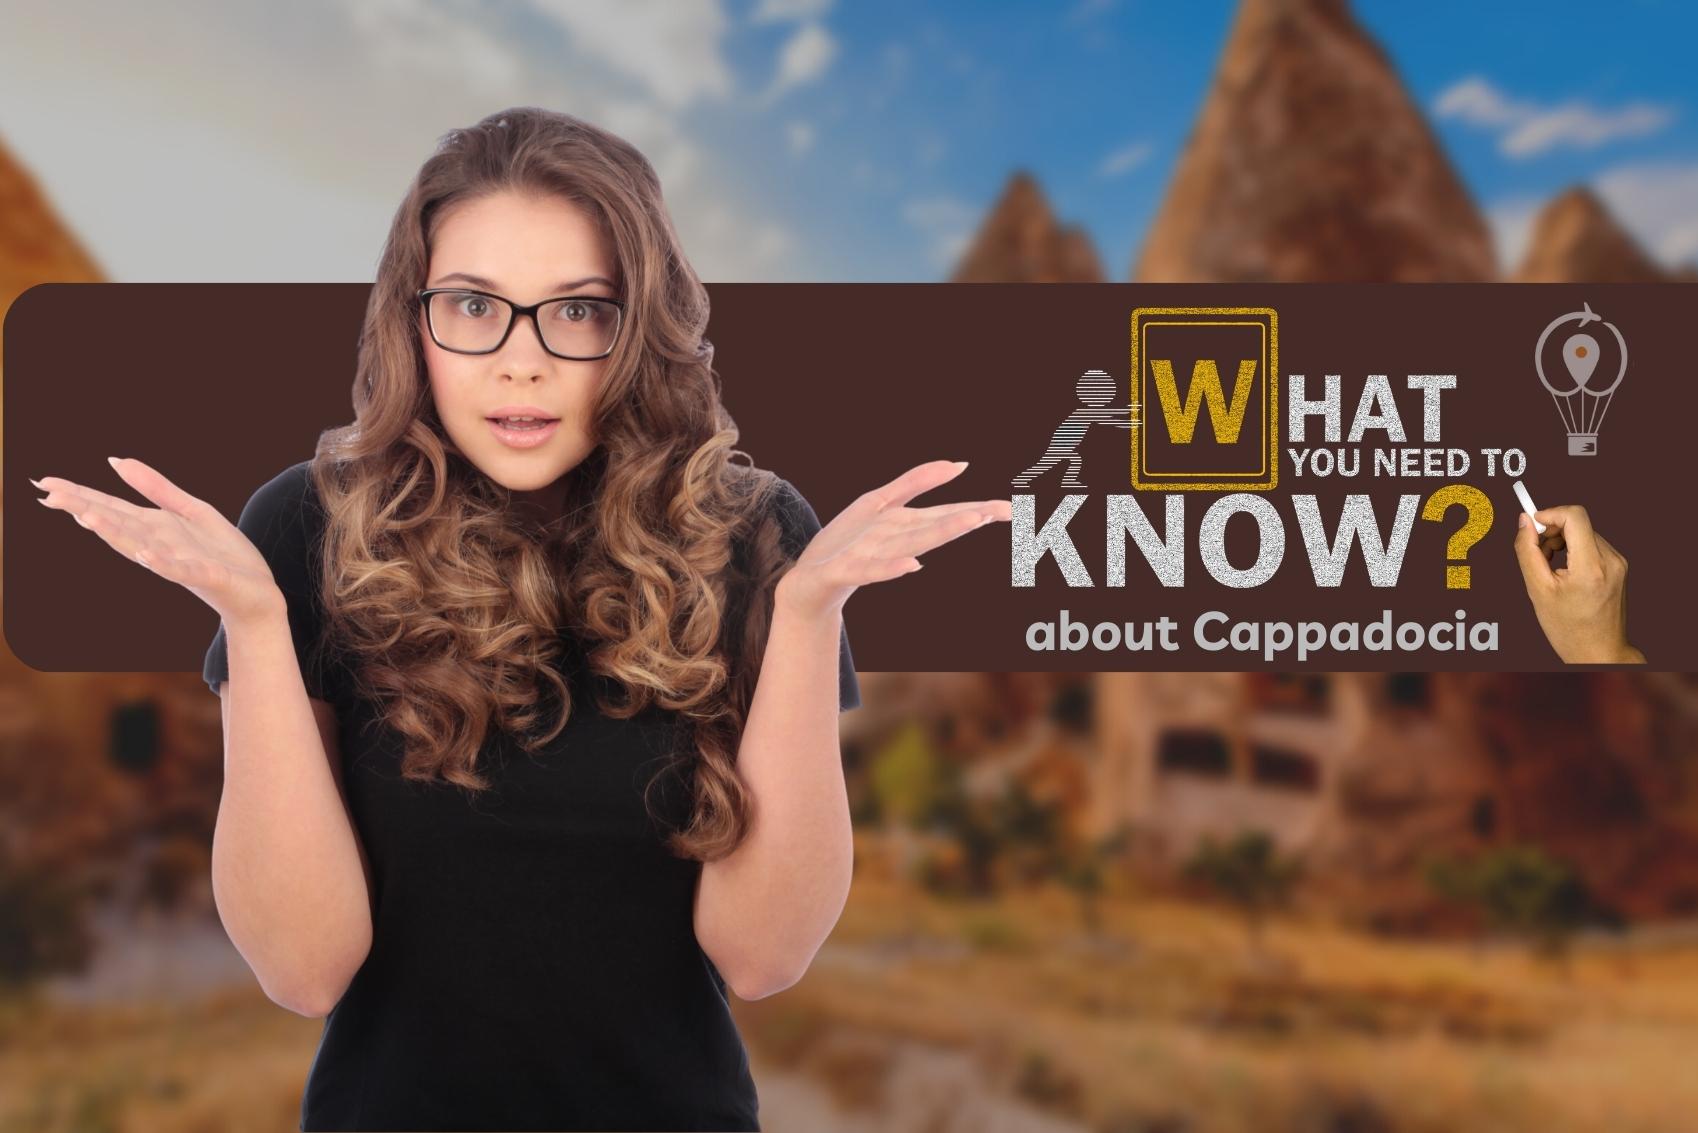 What's there in Cappadocia? - General Information